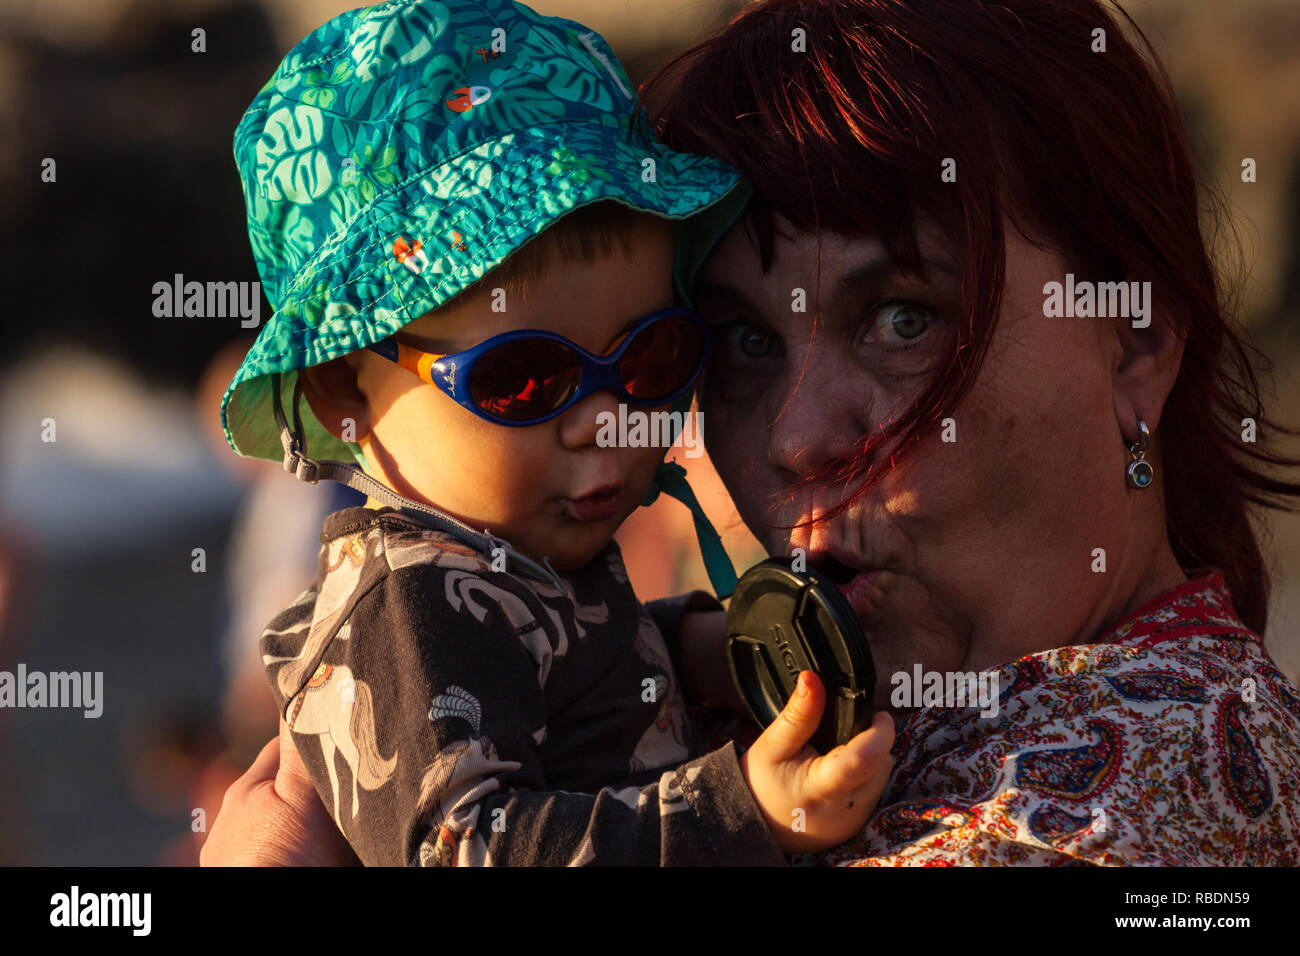 A nice photo of a grandmother and grandson making funny faces Stock Photo